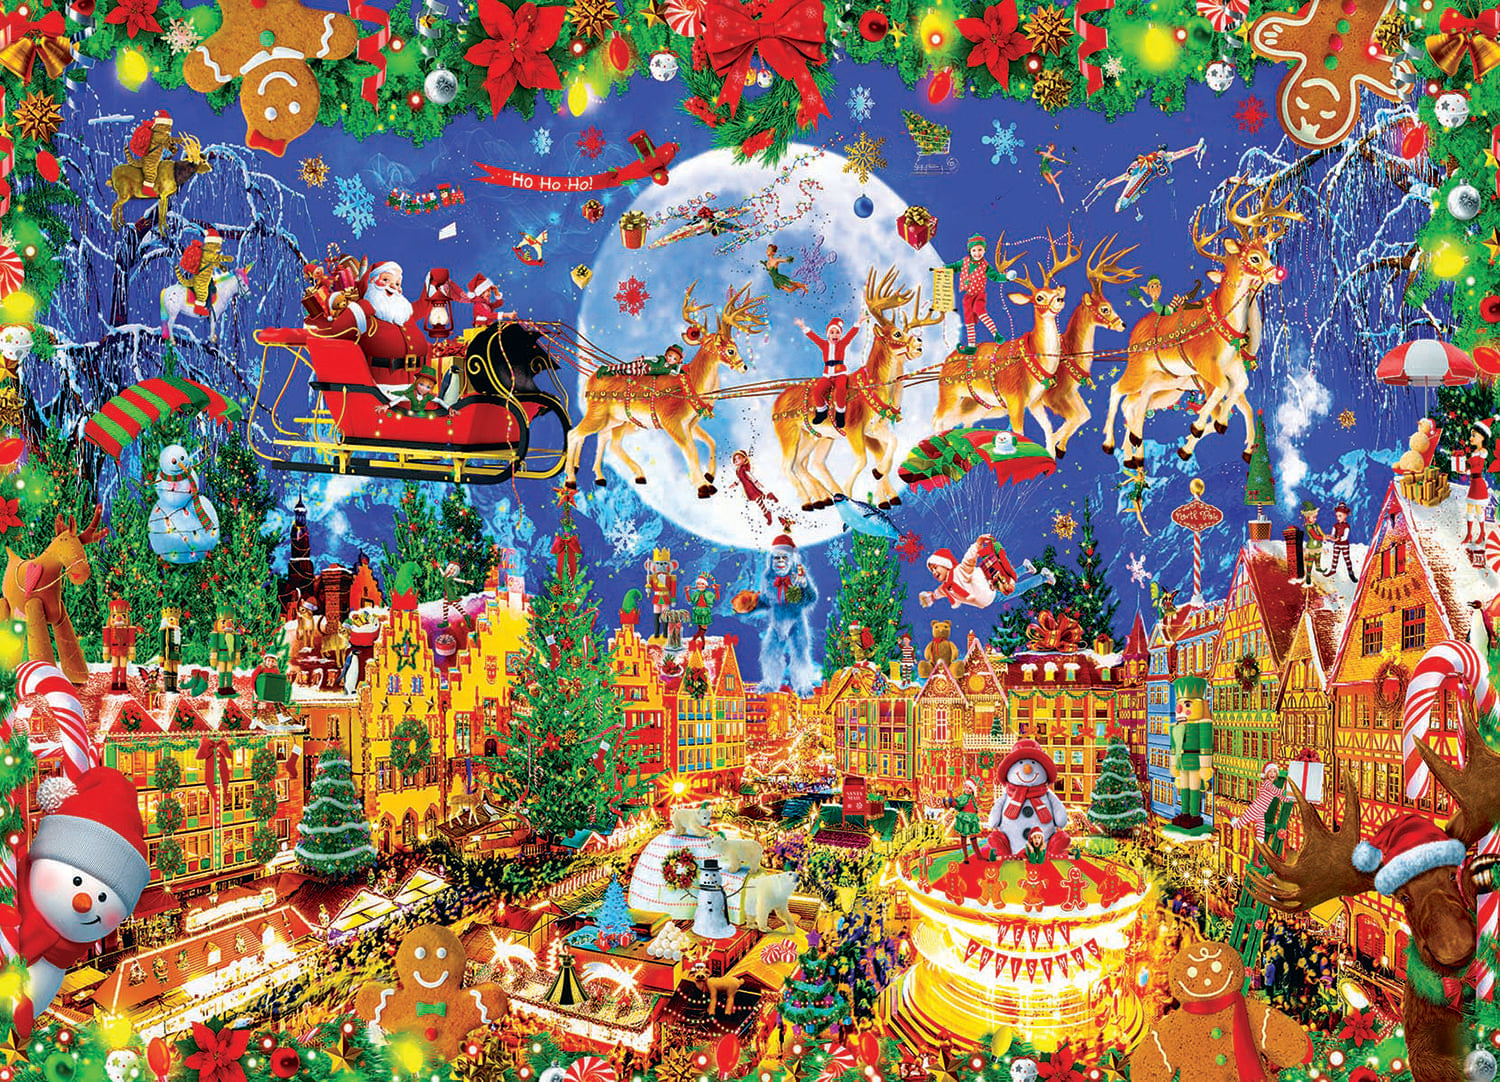 Santa's Coming to Town Christmas Holiday 1000 Piece Jigsaw Puzzle